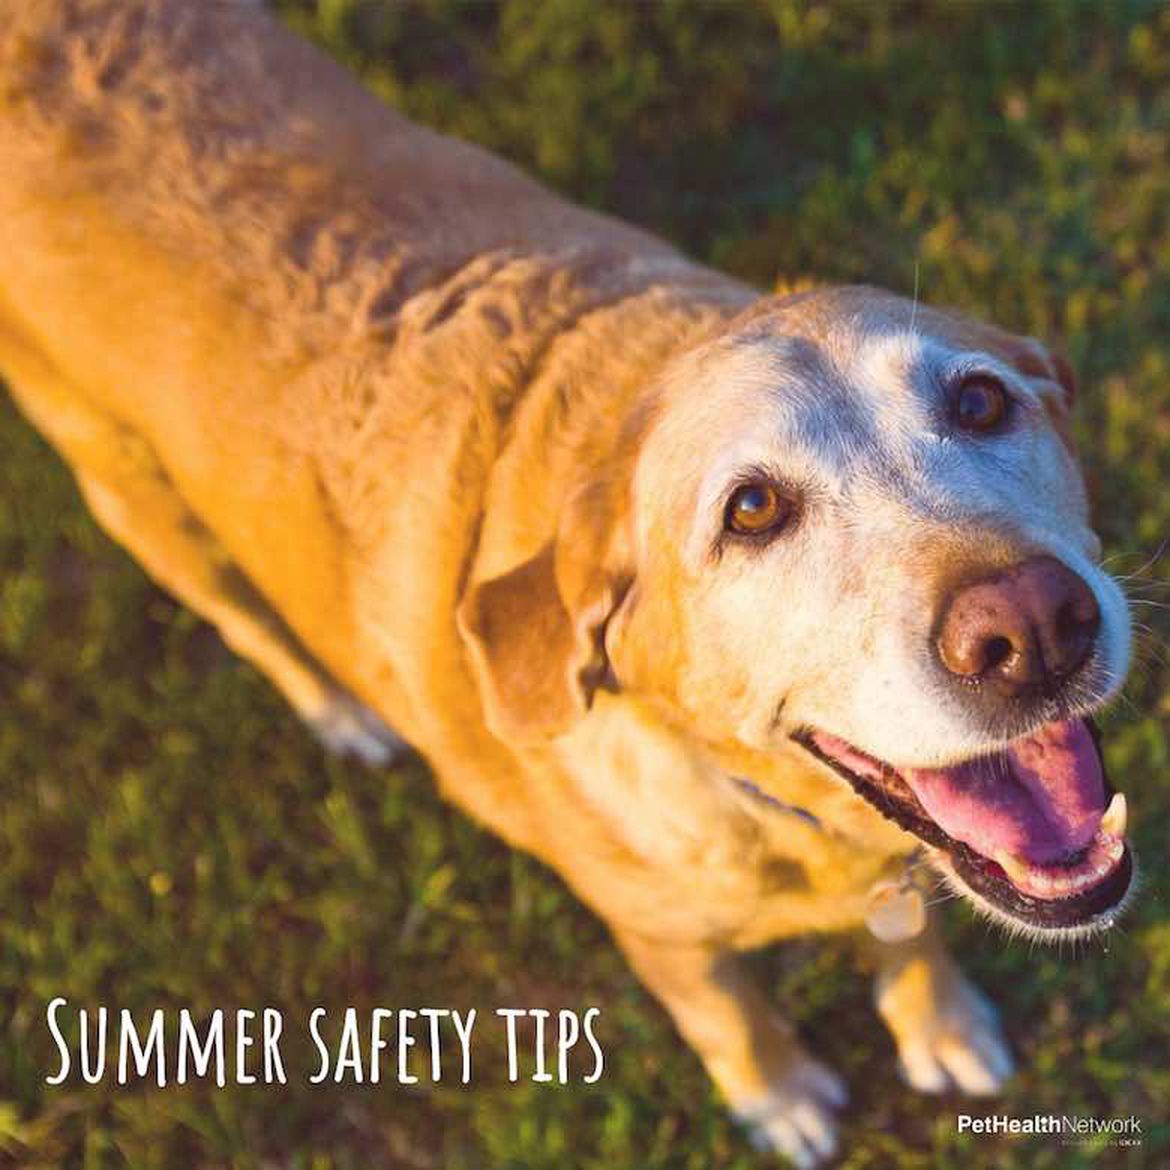 Summer safety tips for dogs.